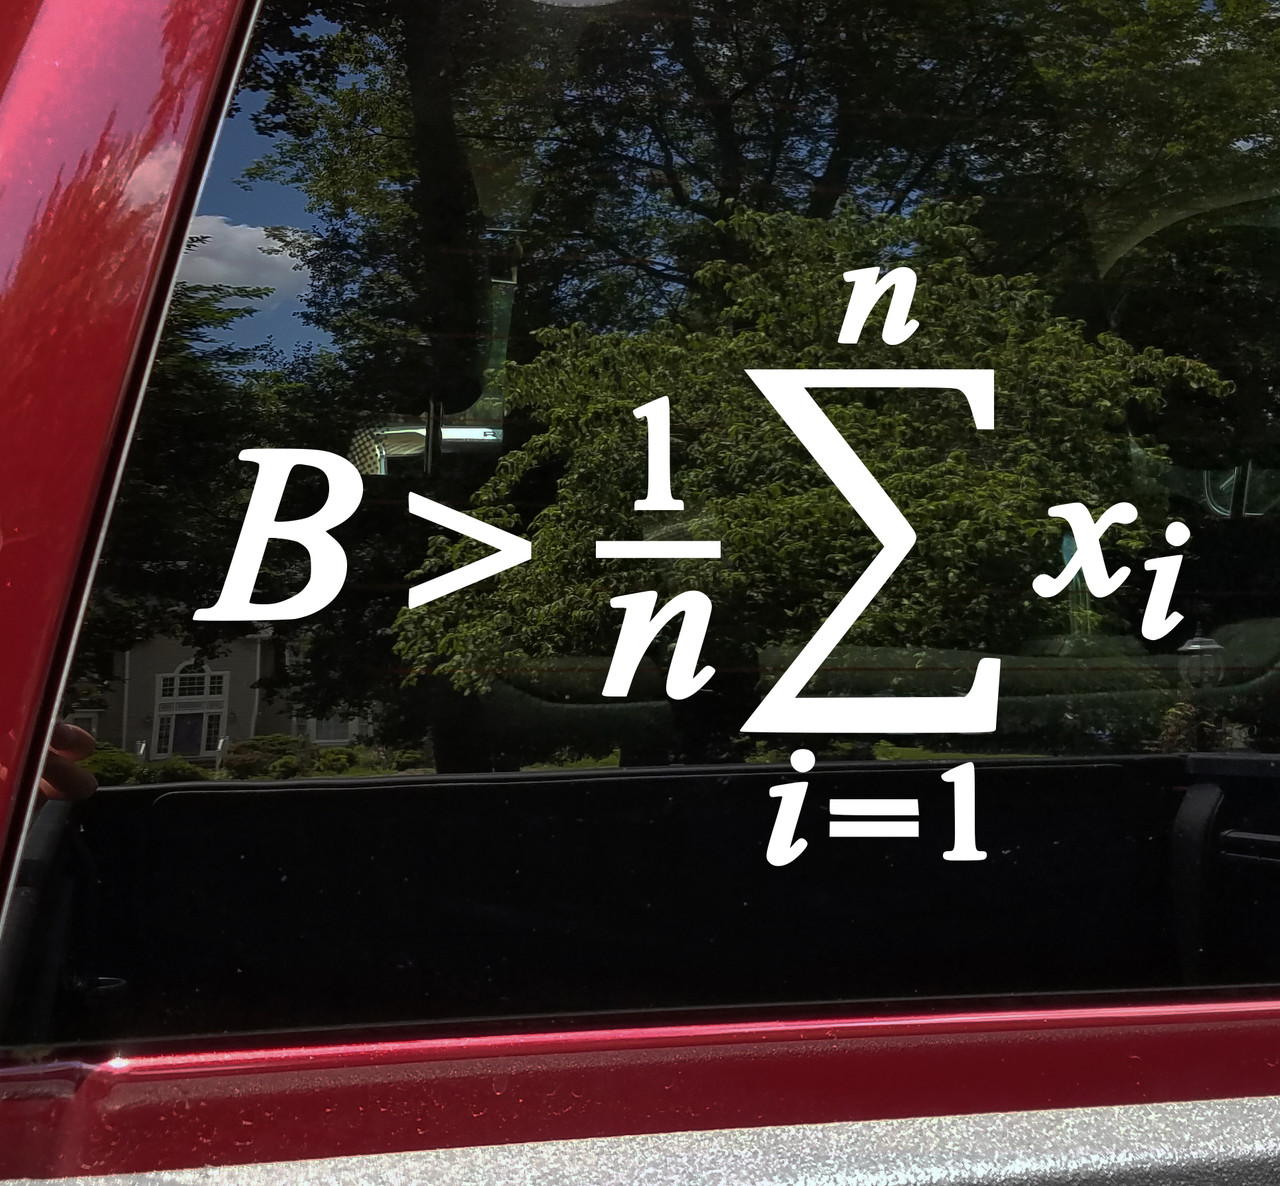 Be Greater Than Average Vinyl Decal -  Math Equation - Die Cut Sticker
